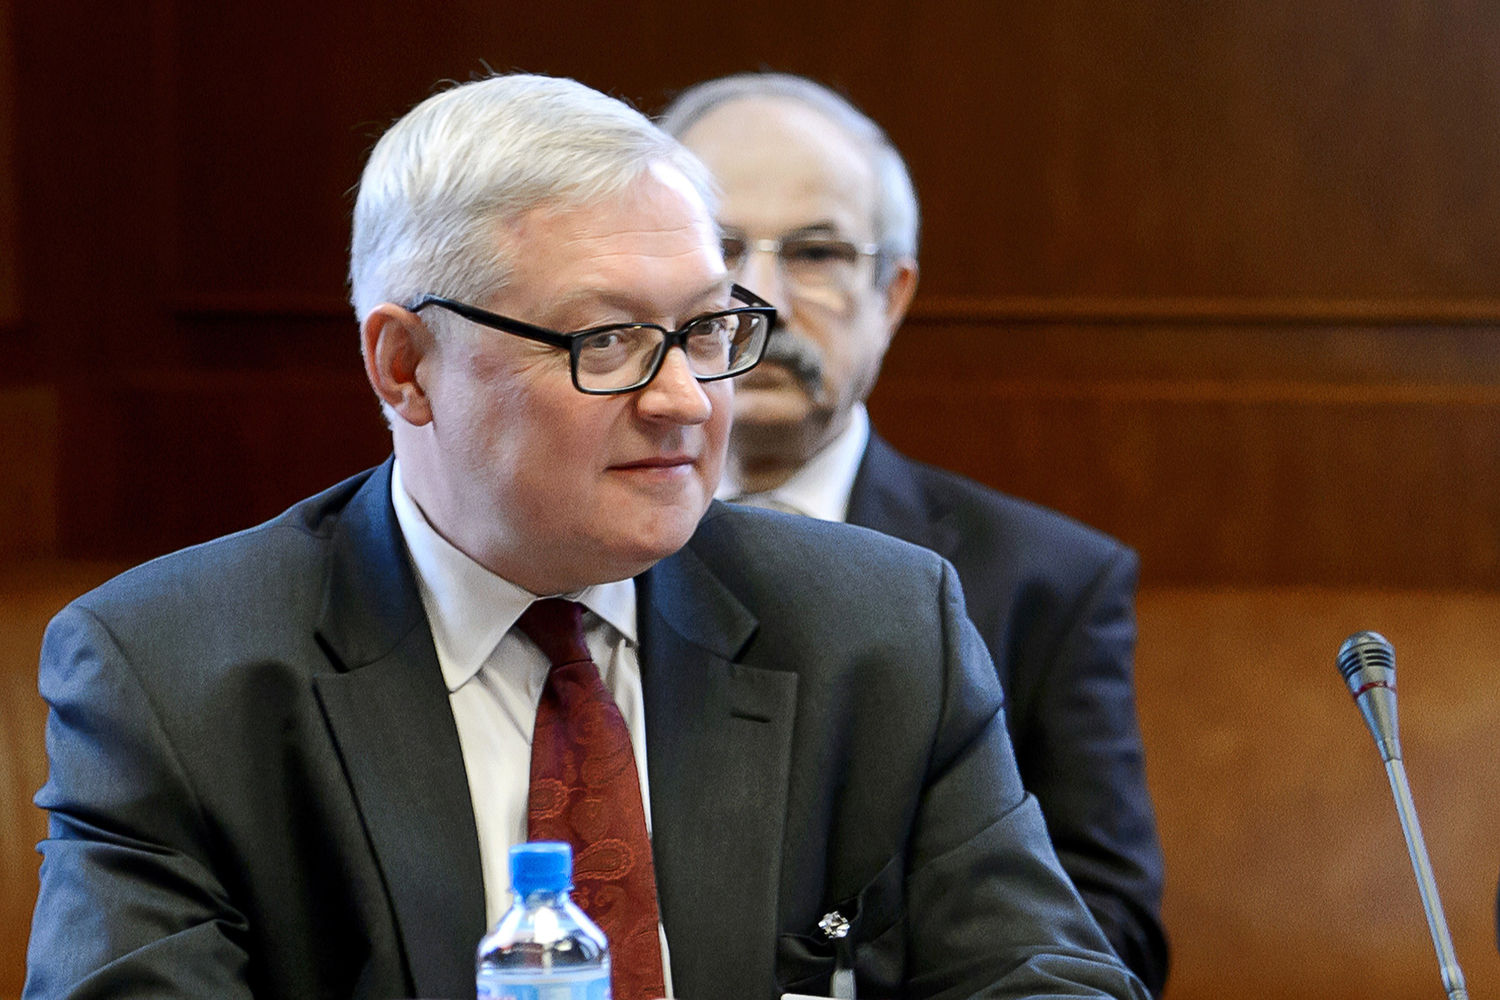 Russian Deputy Foreign Minister Sergei Ryabkov looks on at the start of two days of closed-door nuclear talks at the United Nations offices in Geneva October 15, 2013. (Reuters)